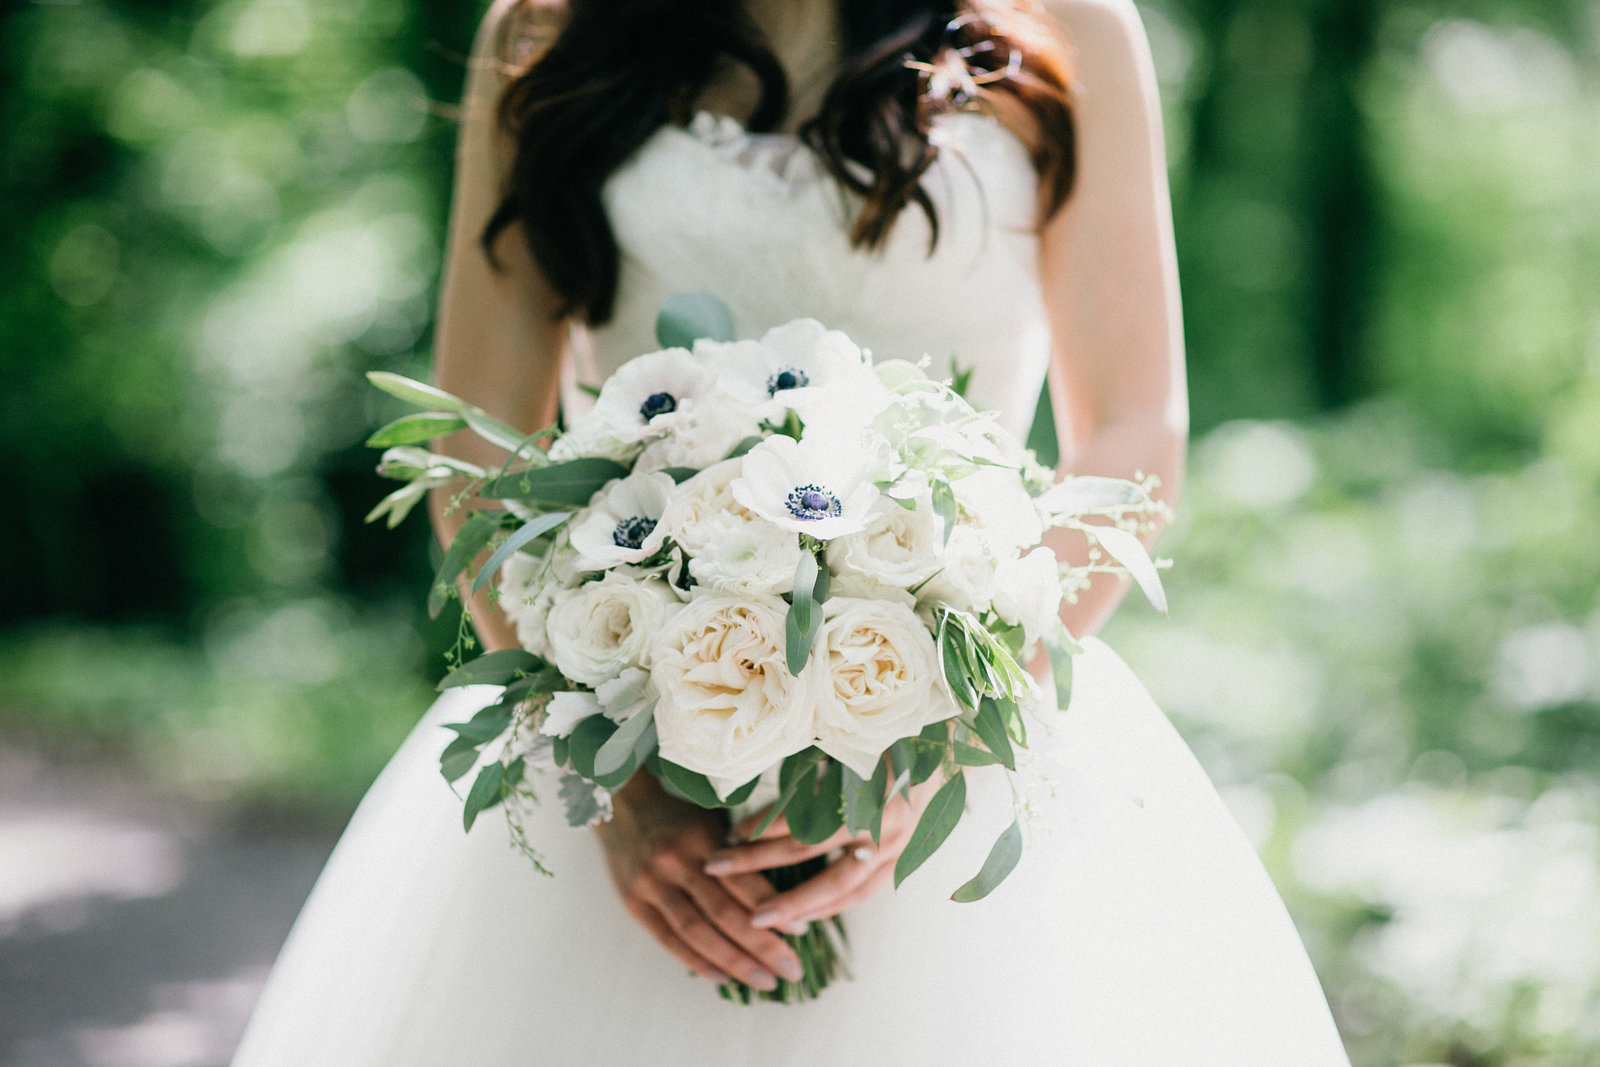 Bride holding a gorgeous bouquet of white florals at this woodsy New Jersey wedding venue.